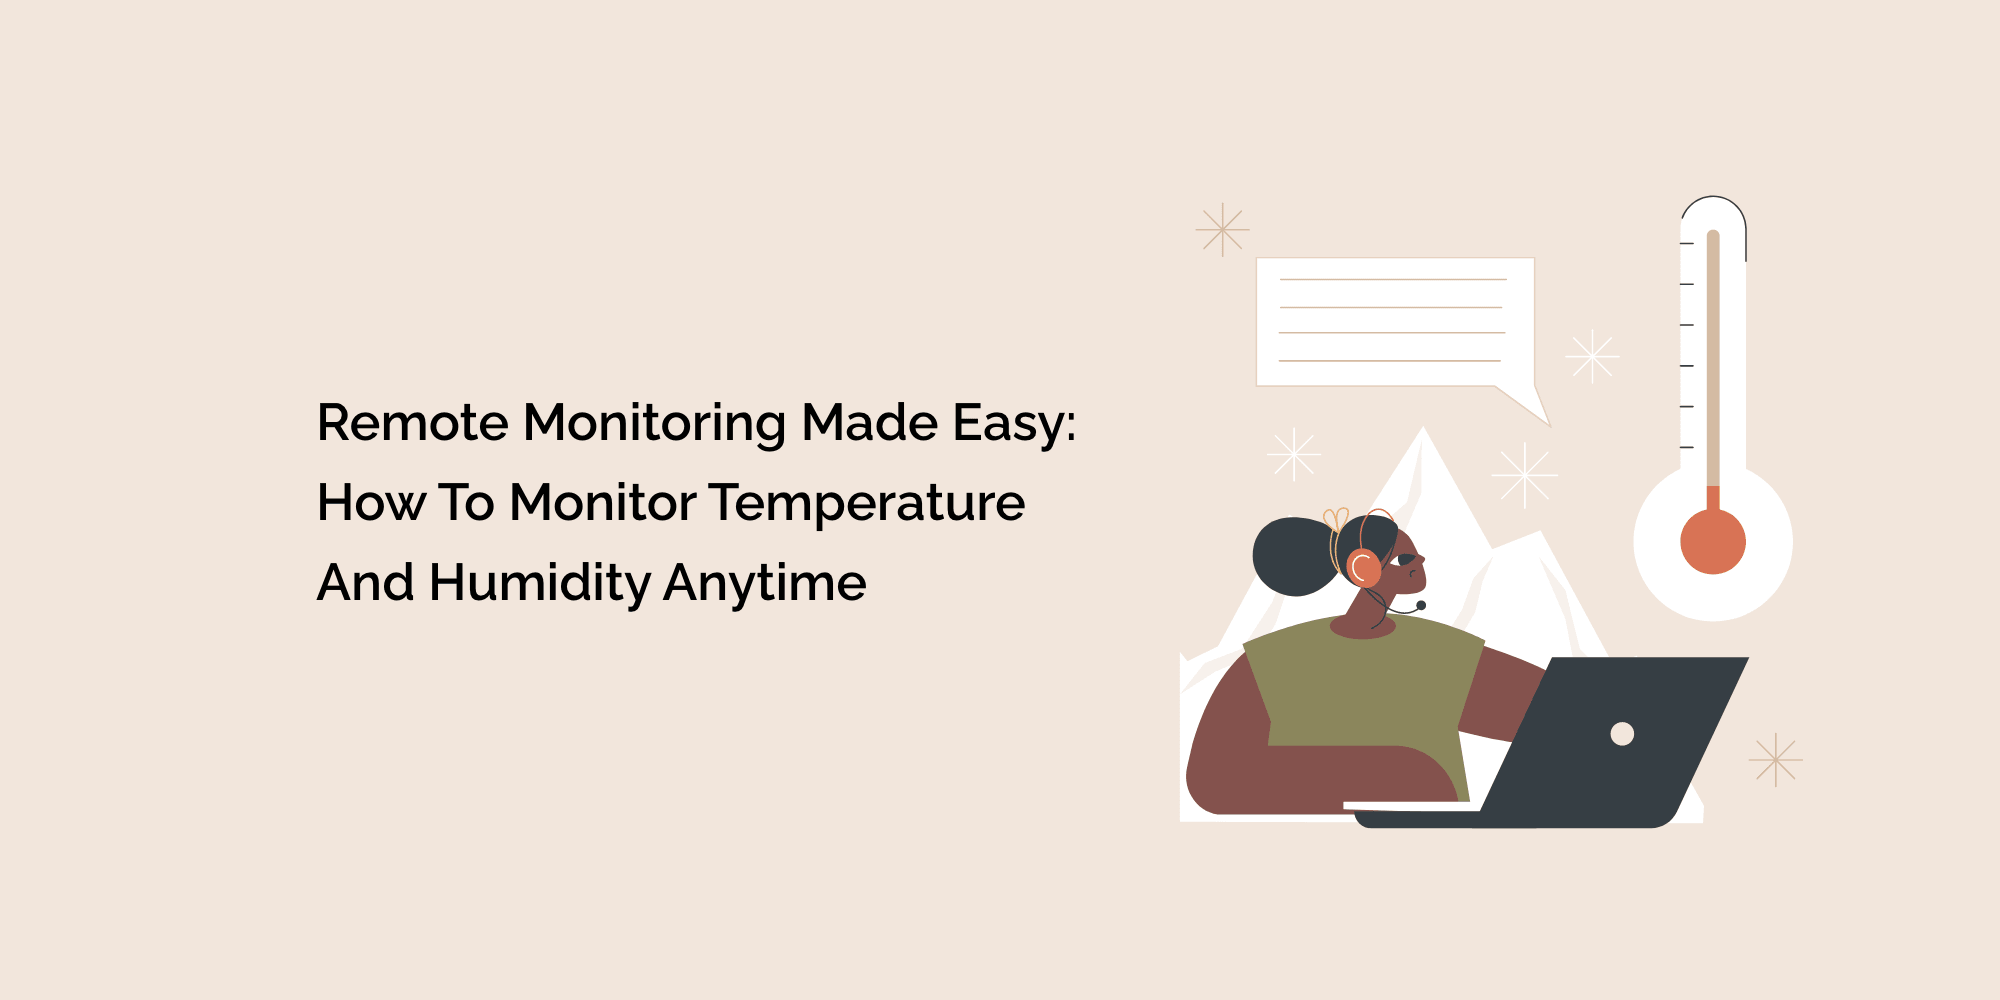 Remote Monitoring Made Easy: How to Monitor Temperature and Humidity Anytime